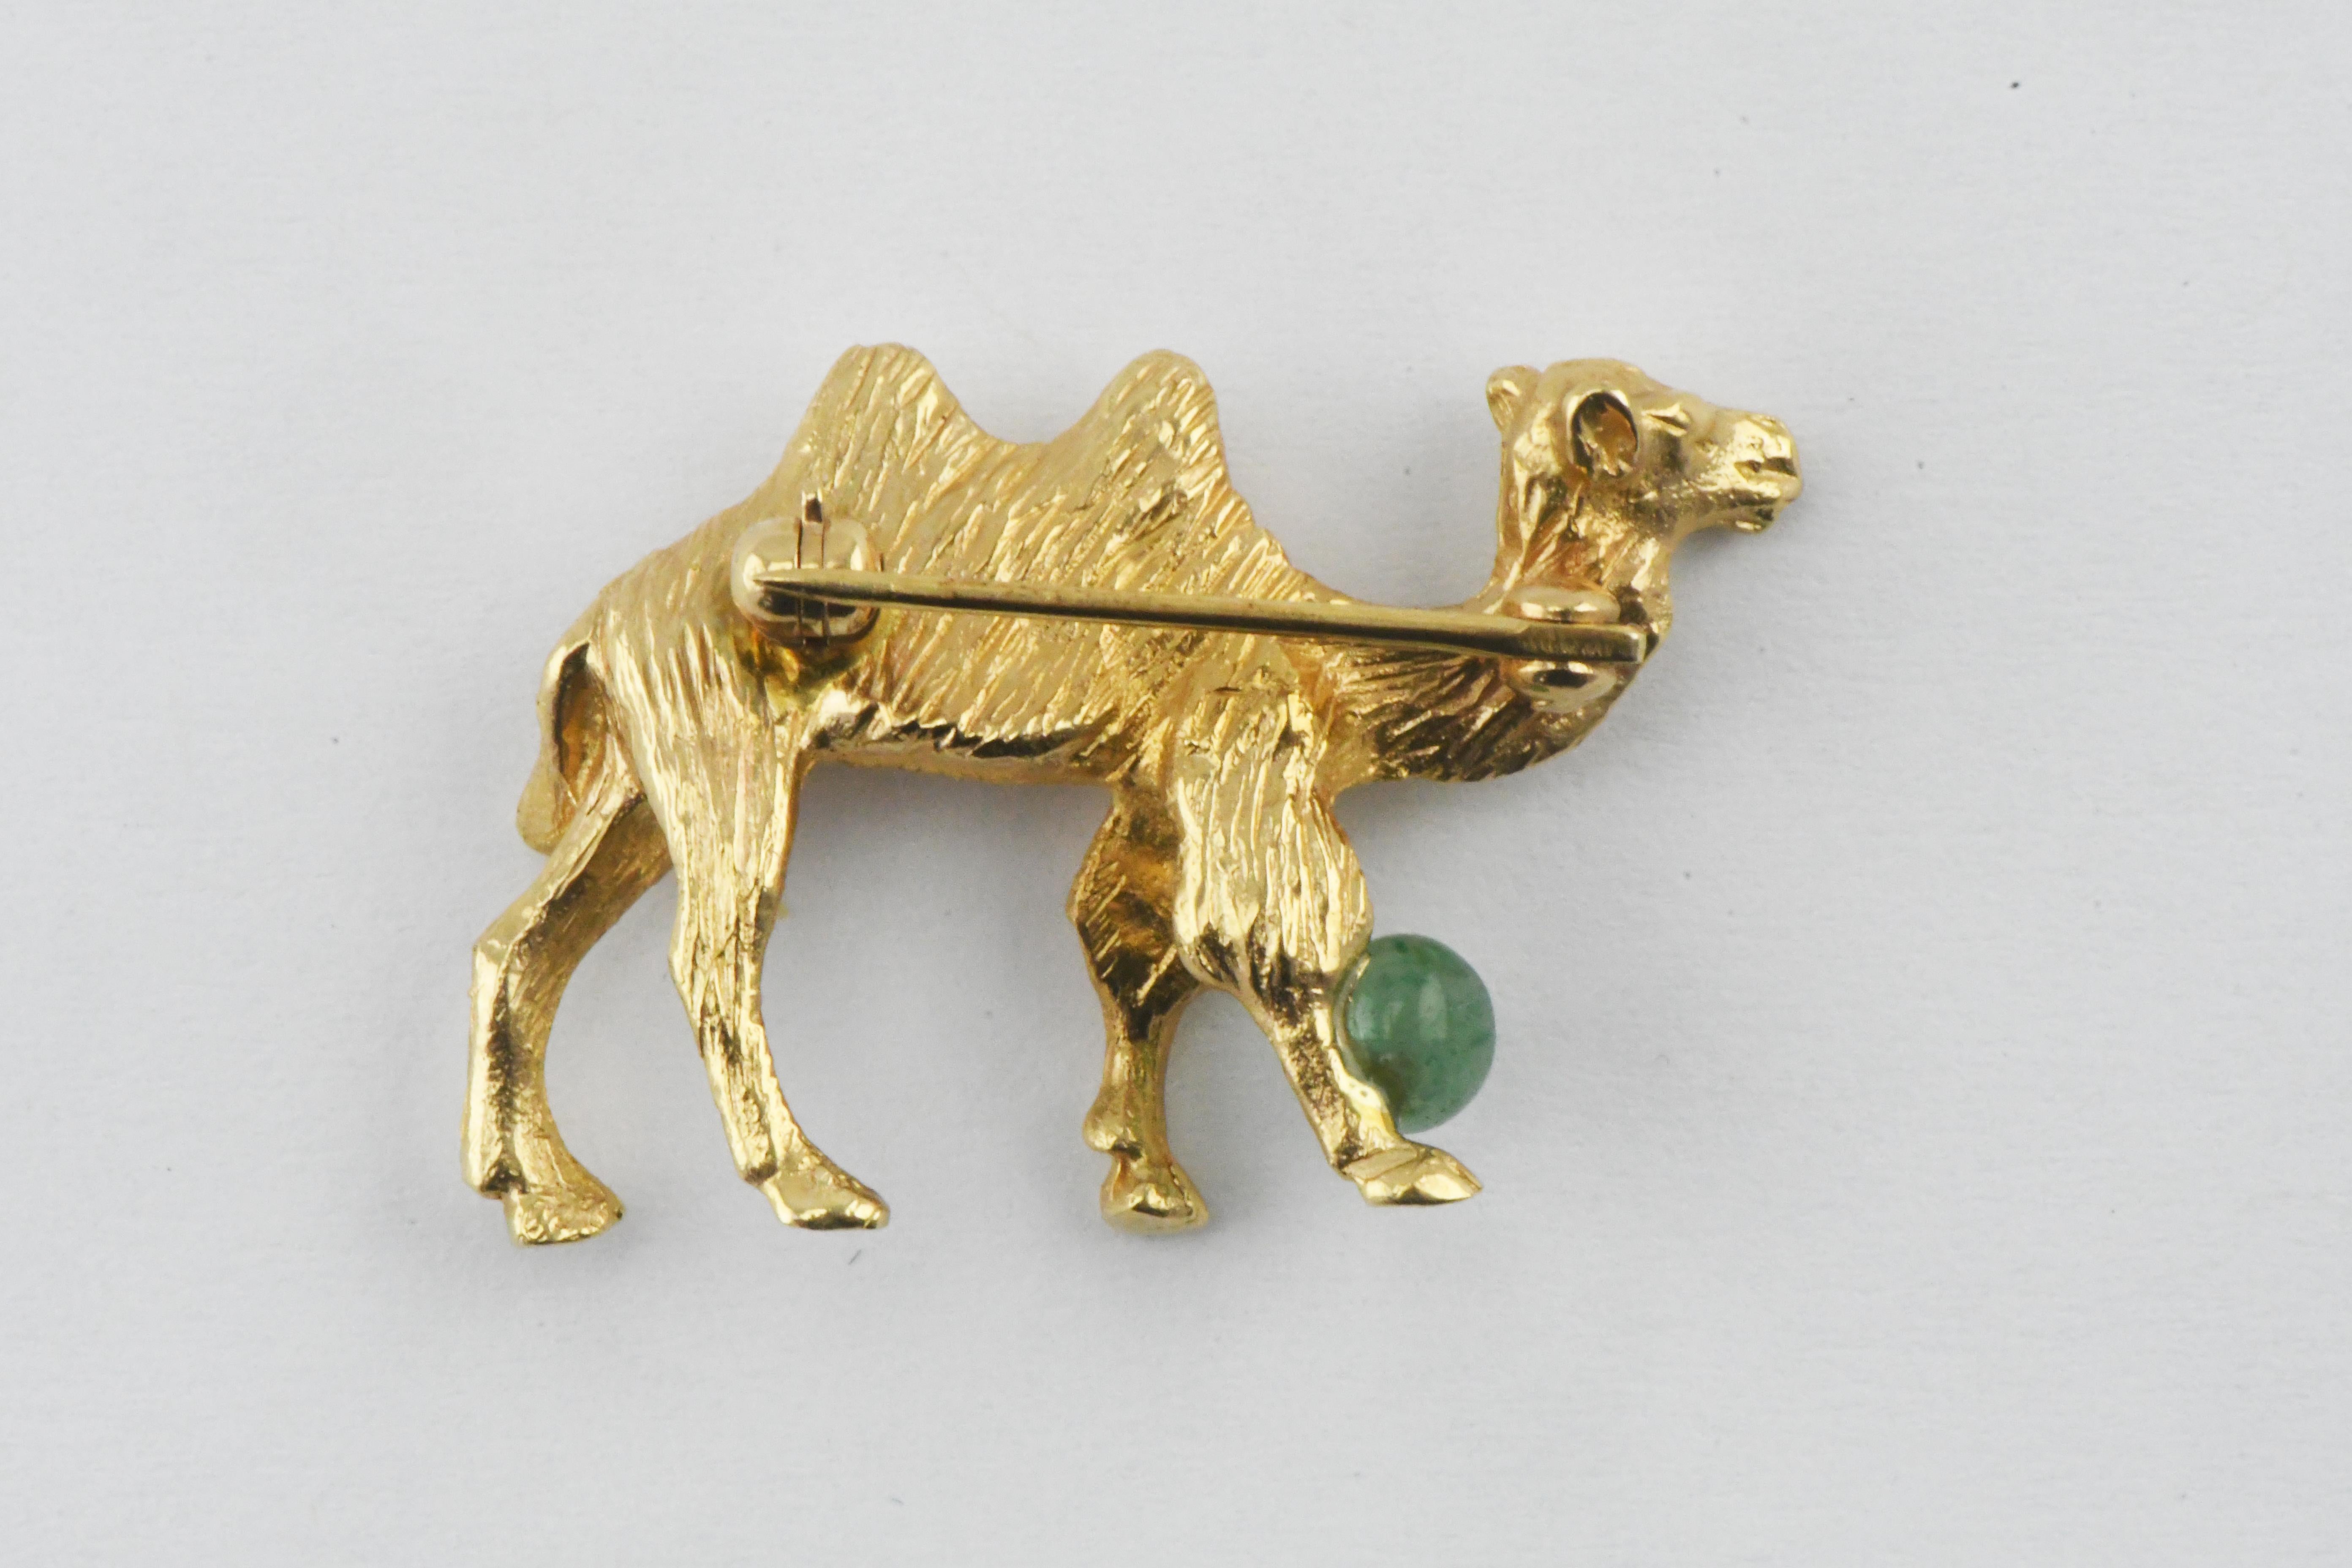 Vintage Unsigned 14k Solid Gold Double Hump Camel Pin Brooch with jade Accent. 6.8 grams and 1 1/8” x ¾”